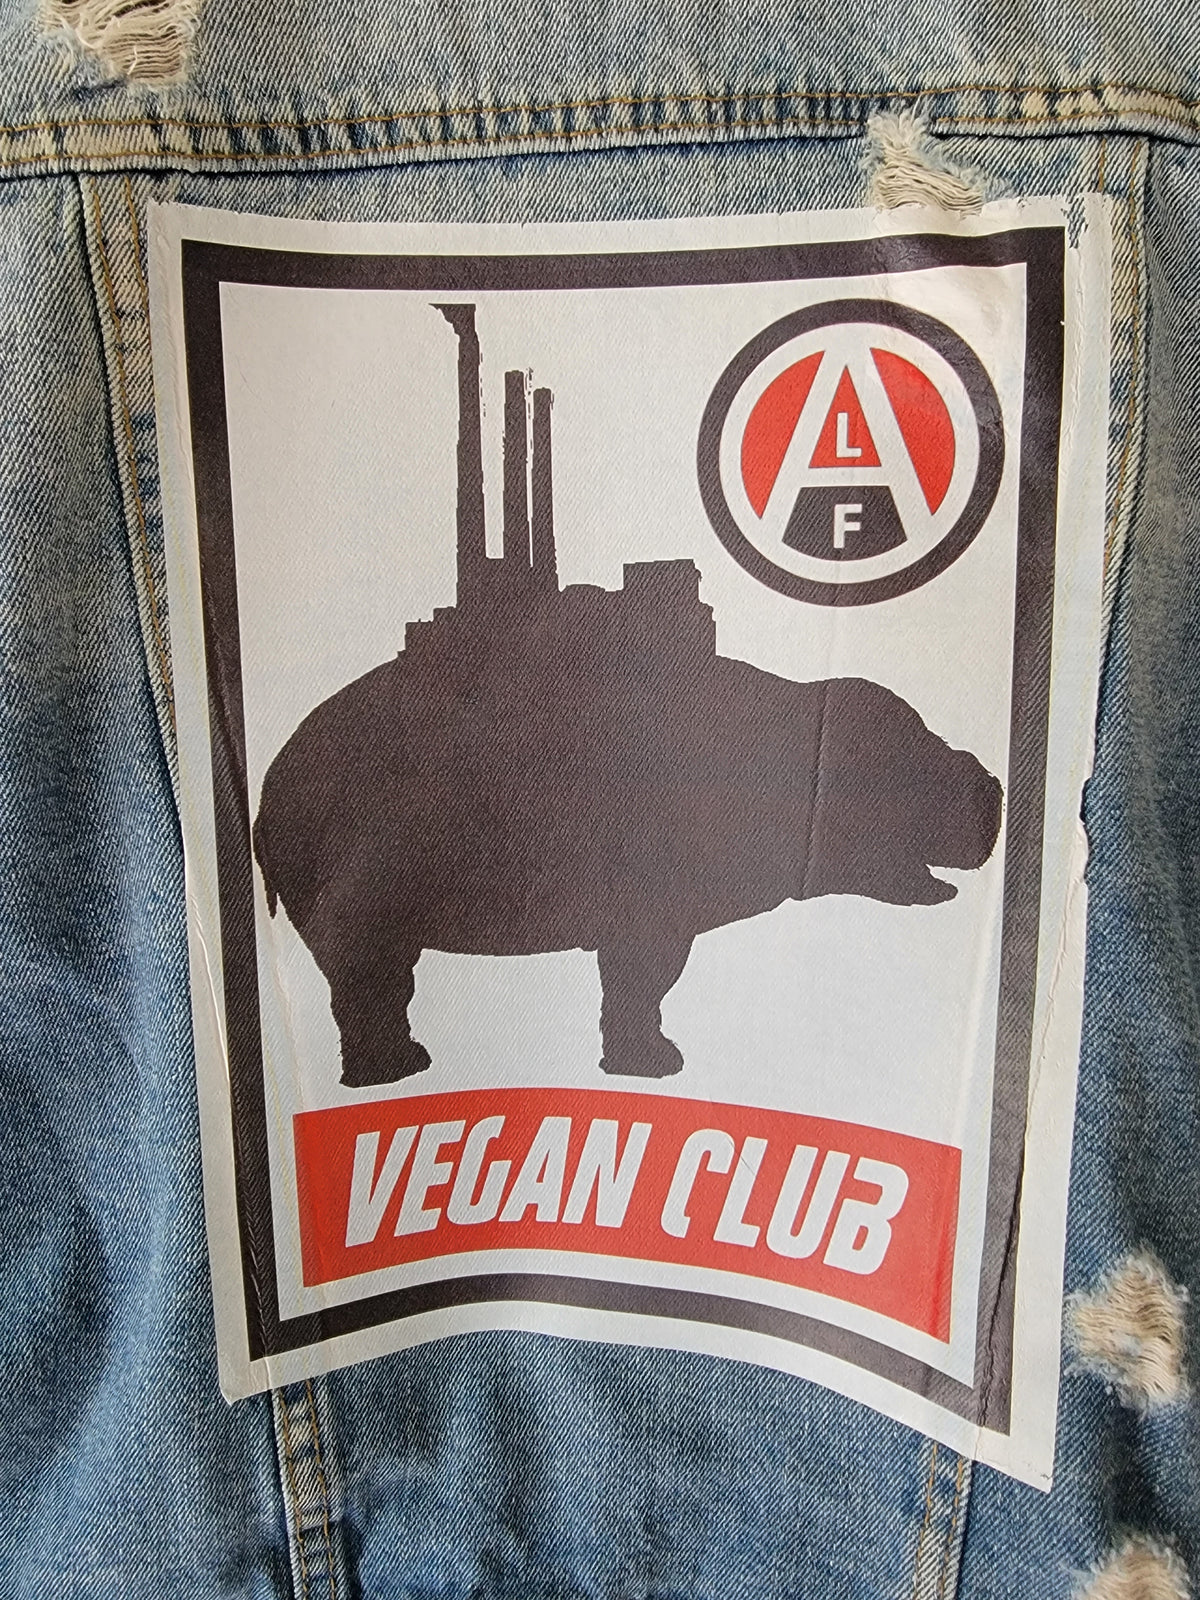 SOLD OUT - One of a Kind Upcycled Club Jean Jacket feat Okja & ALF in color